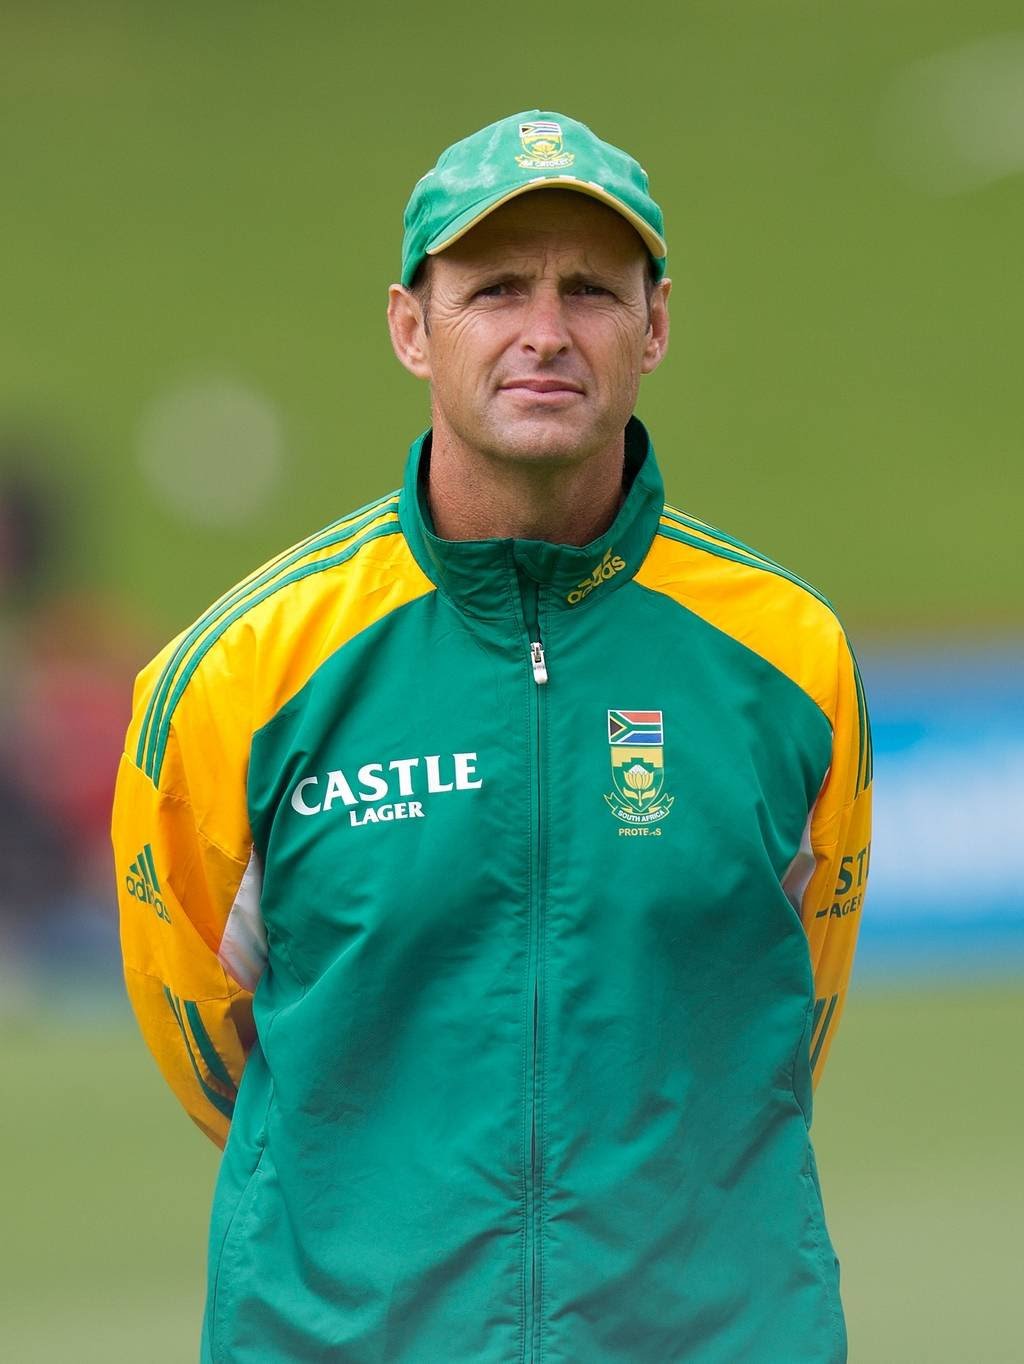 Happy birthday to South Africa great cricketer 